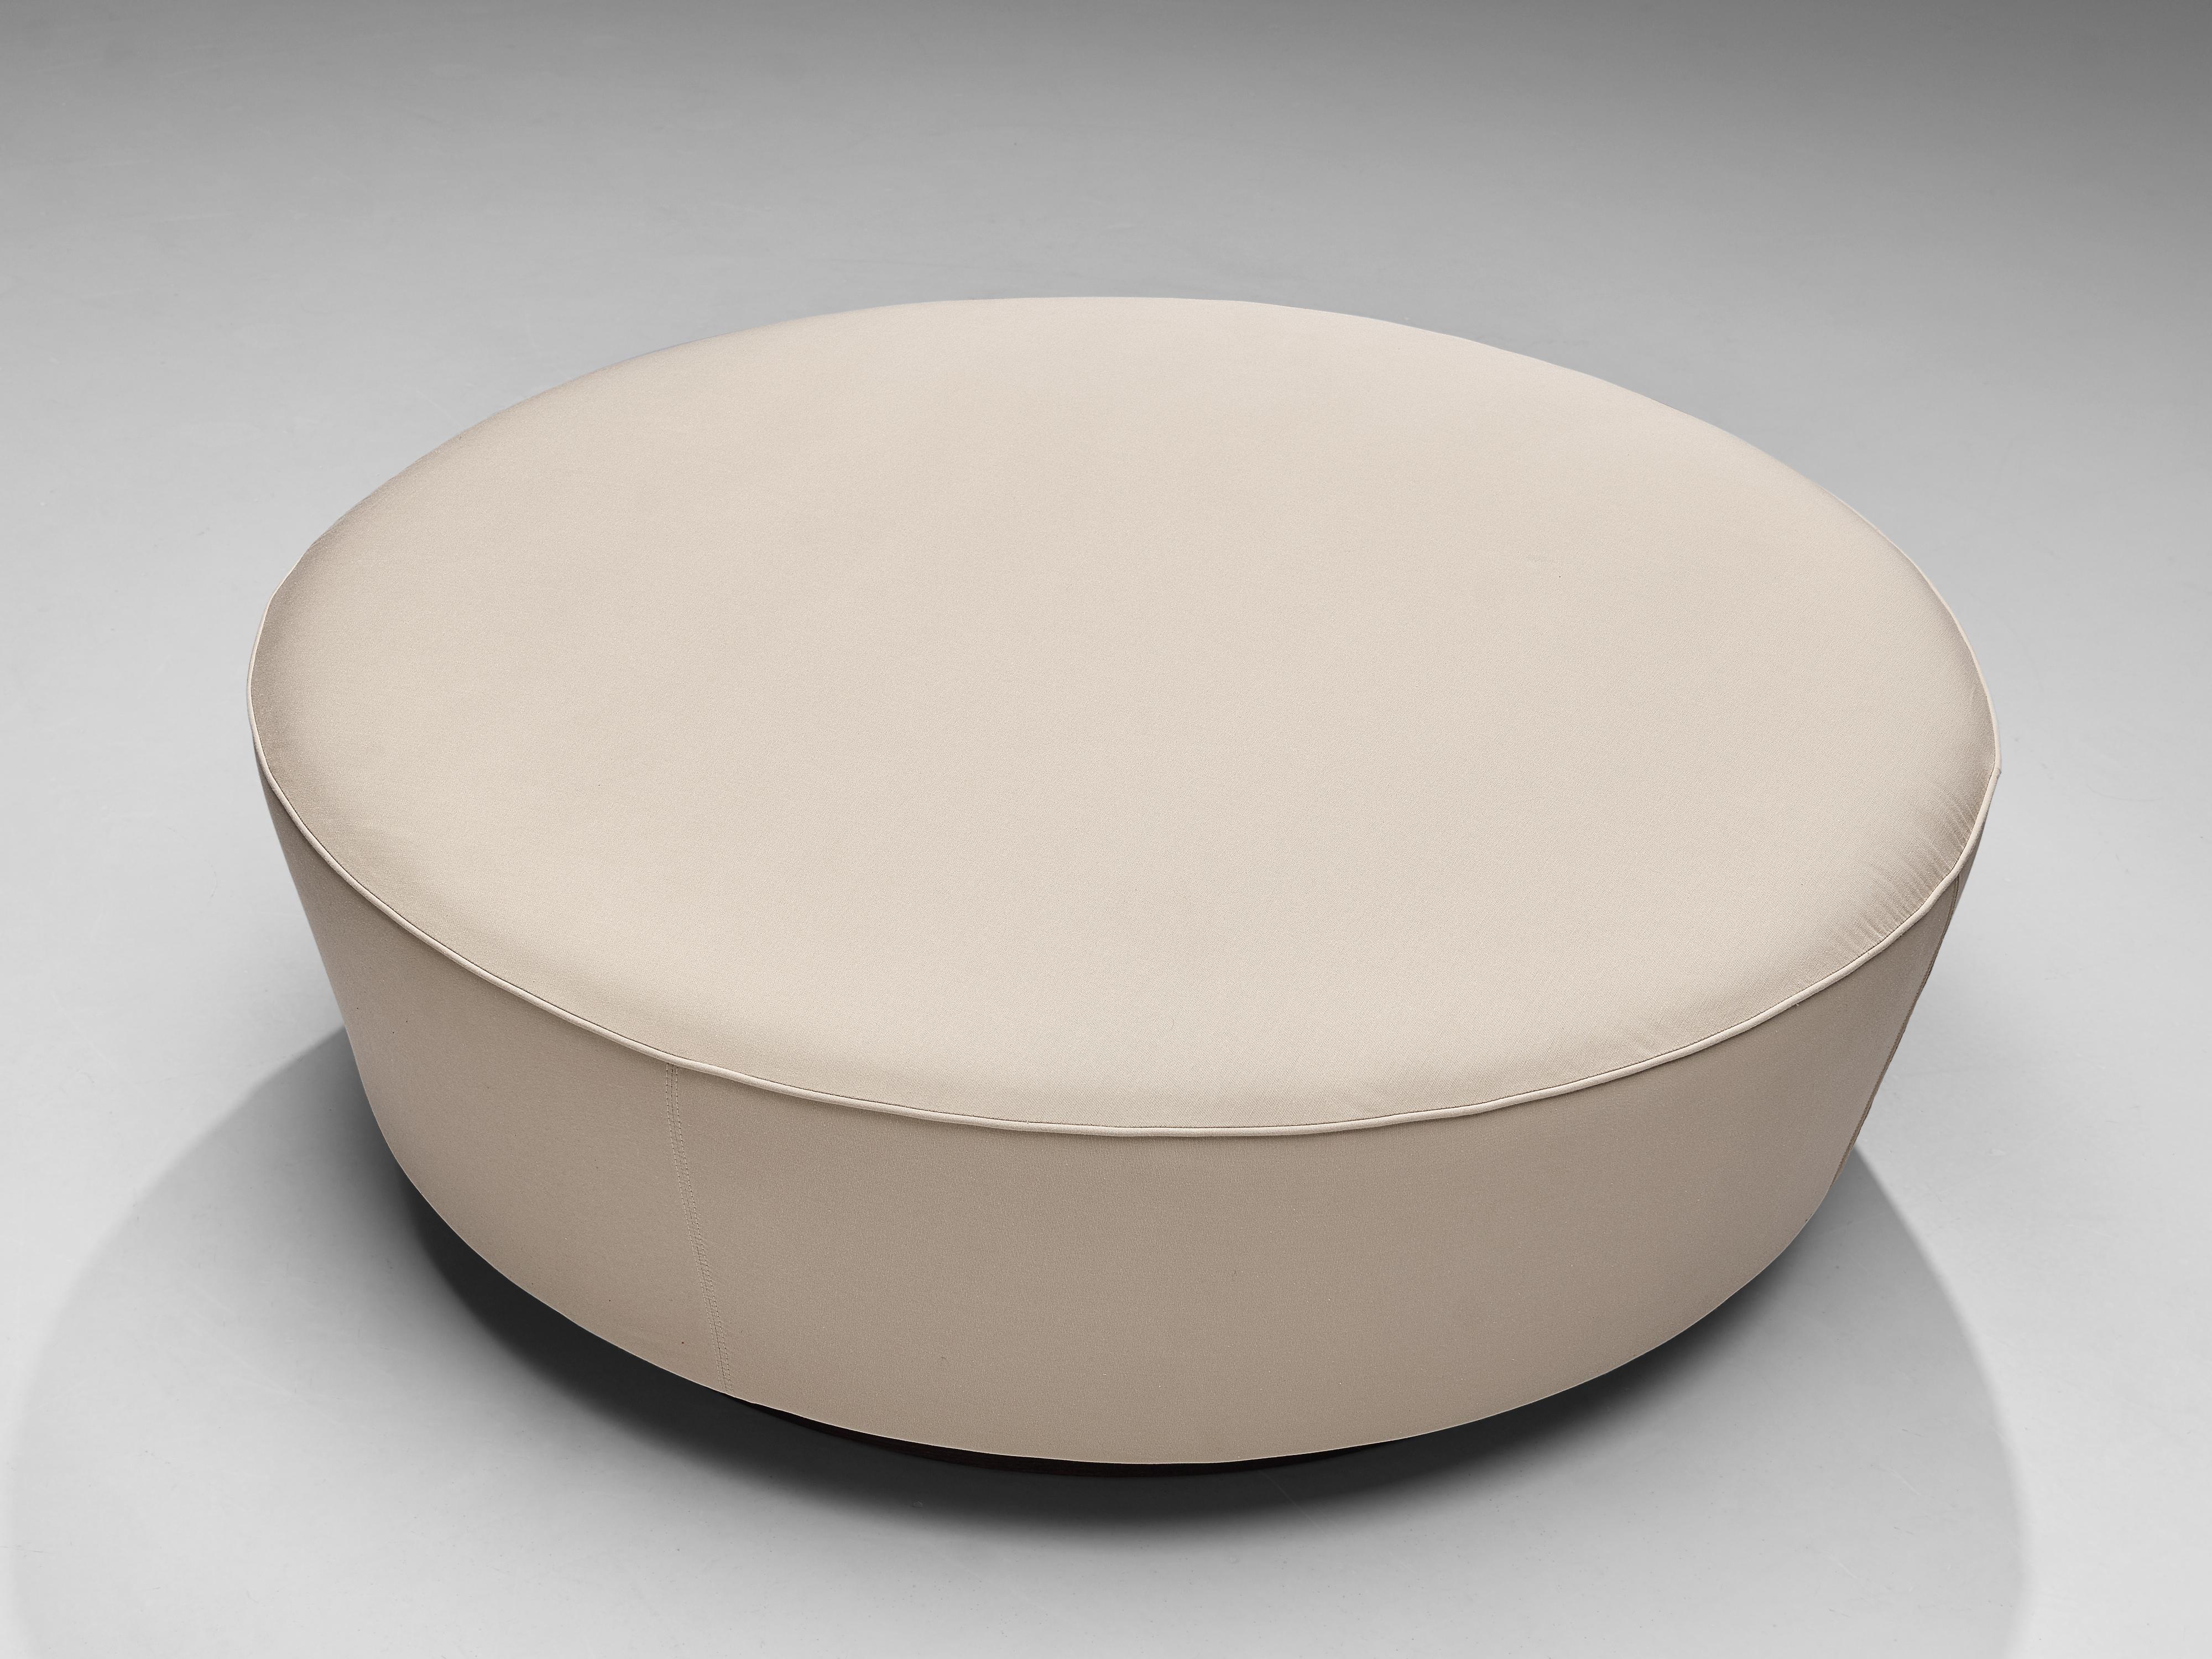 Vladimir Kagan for the Kagan New York Collection, large pouf, off-white fabric, wood, United States, designed in 1970s, recent production

Large pouf designed by Vladimir Kagan for the New York series. With a diameter of 135 cm this pouf has an